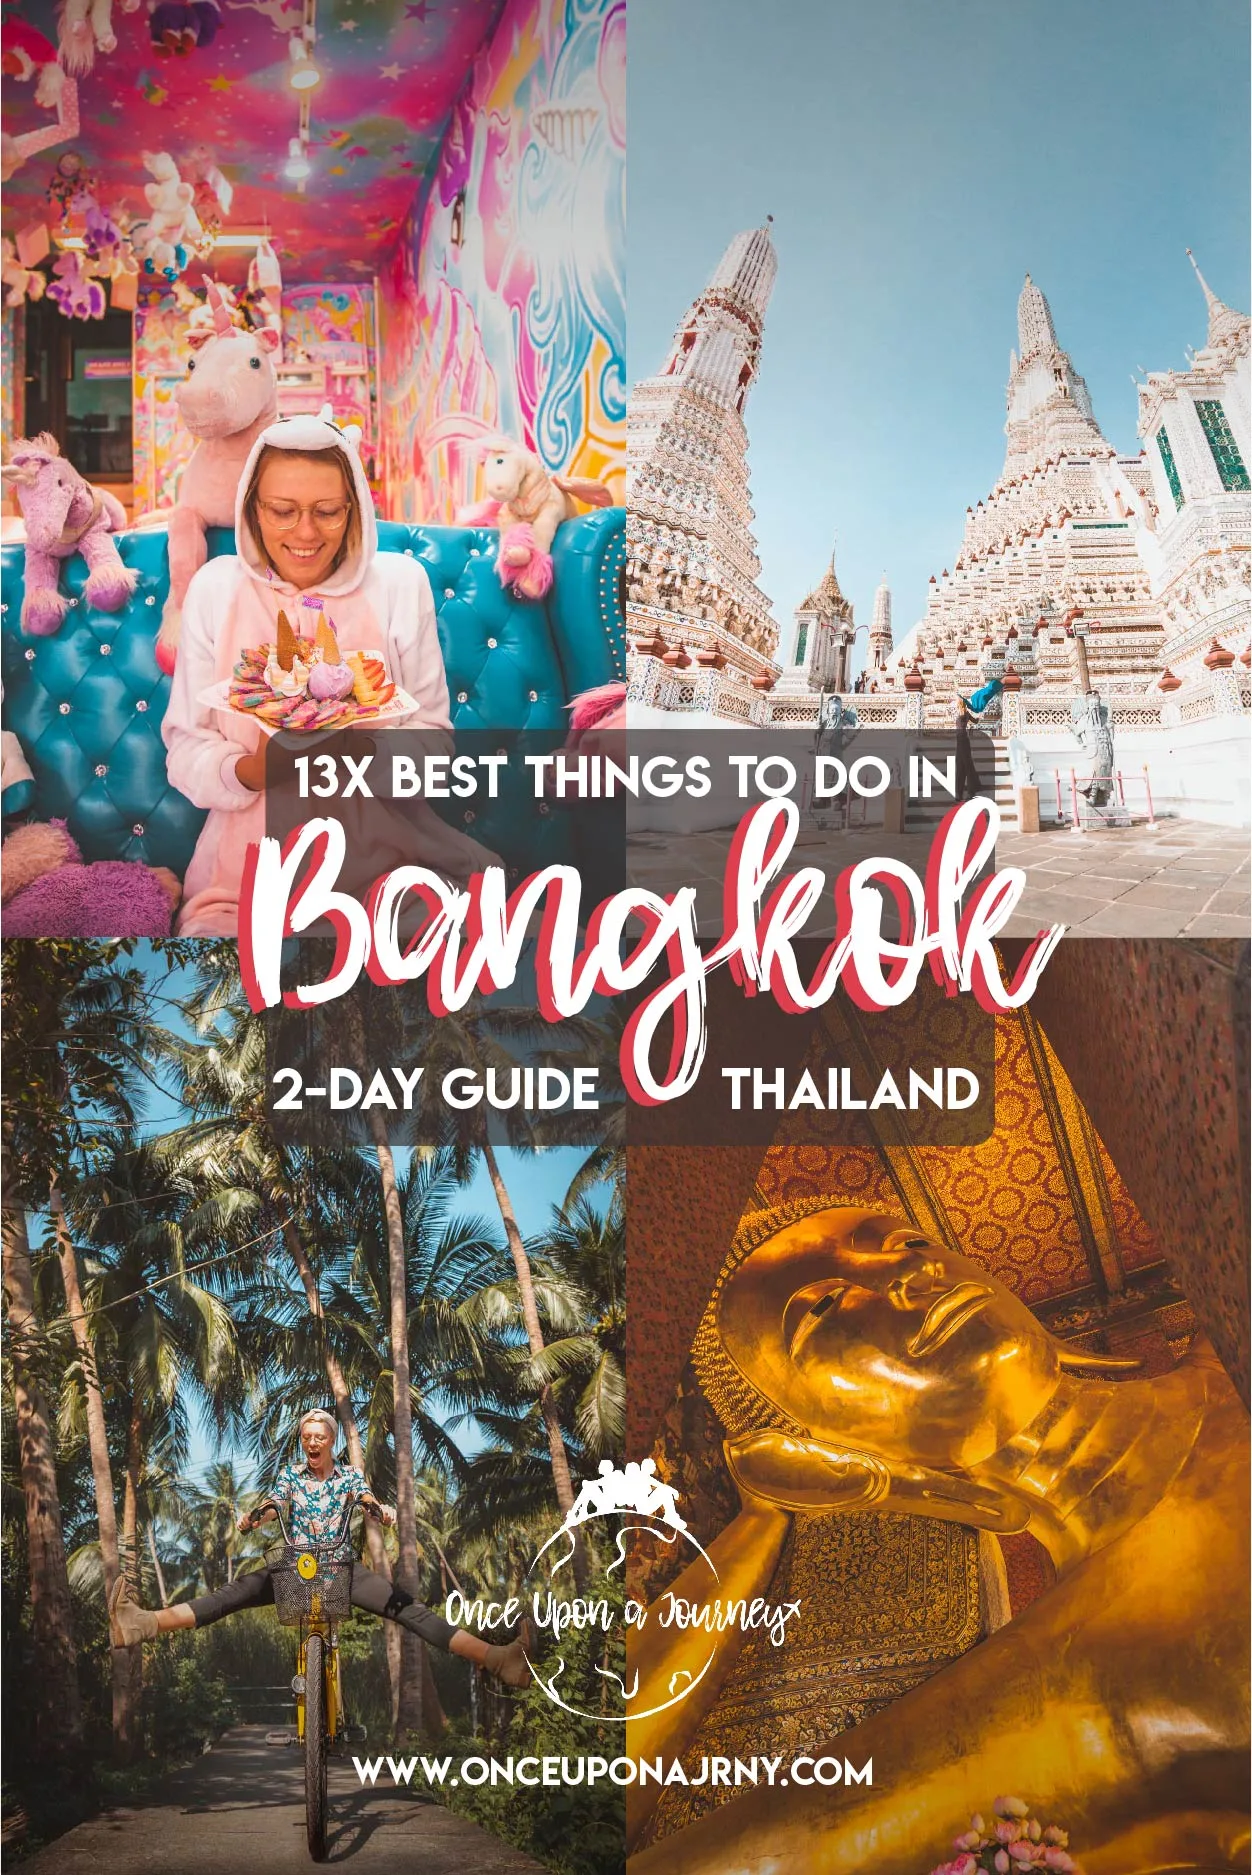 13x Best Things to do in Bangkok | 2-Day Guide Thailand | Once Upon A Journey LGBT Travel Blog #lesbiantravel #bangkok #thailand #bestthingstodo #travel